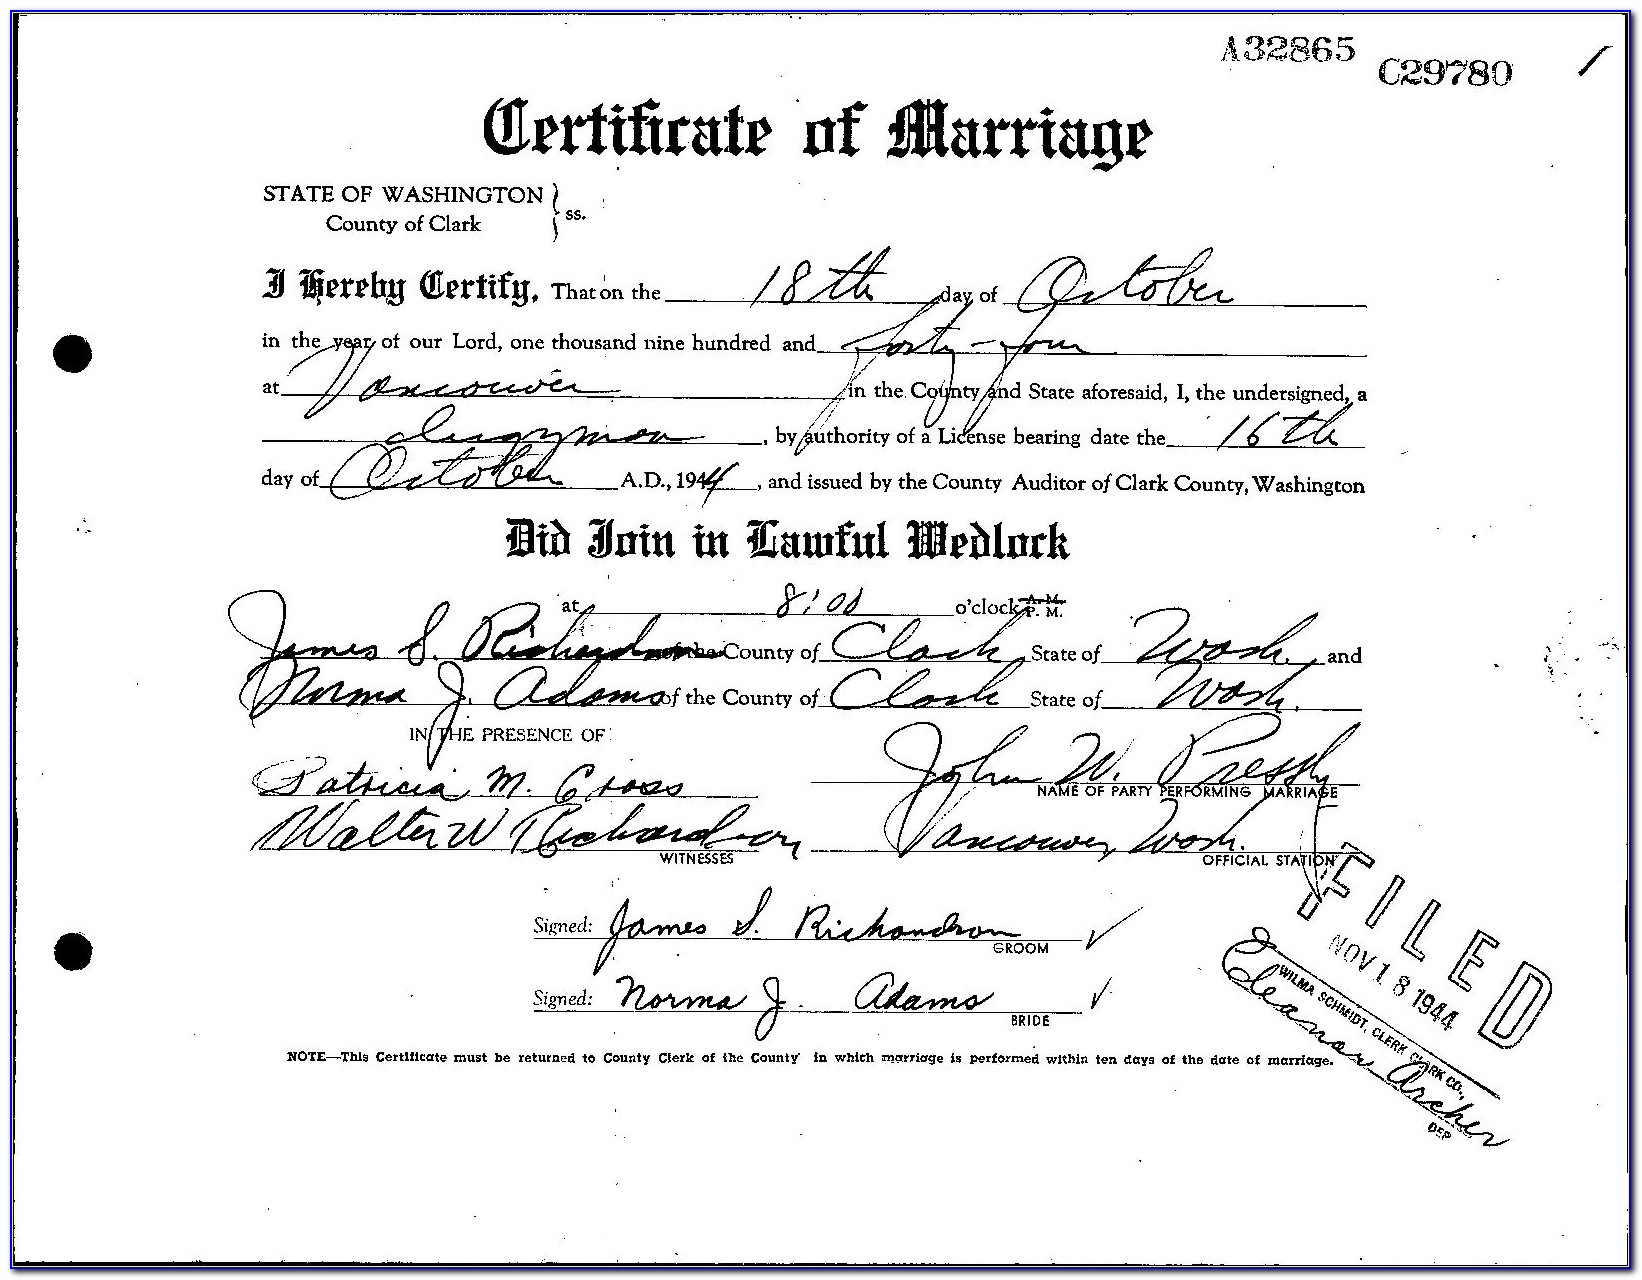 Clark County Vancouver Wa Marriage License